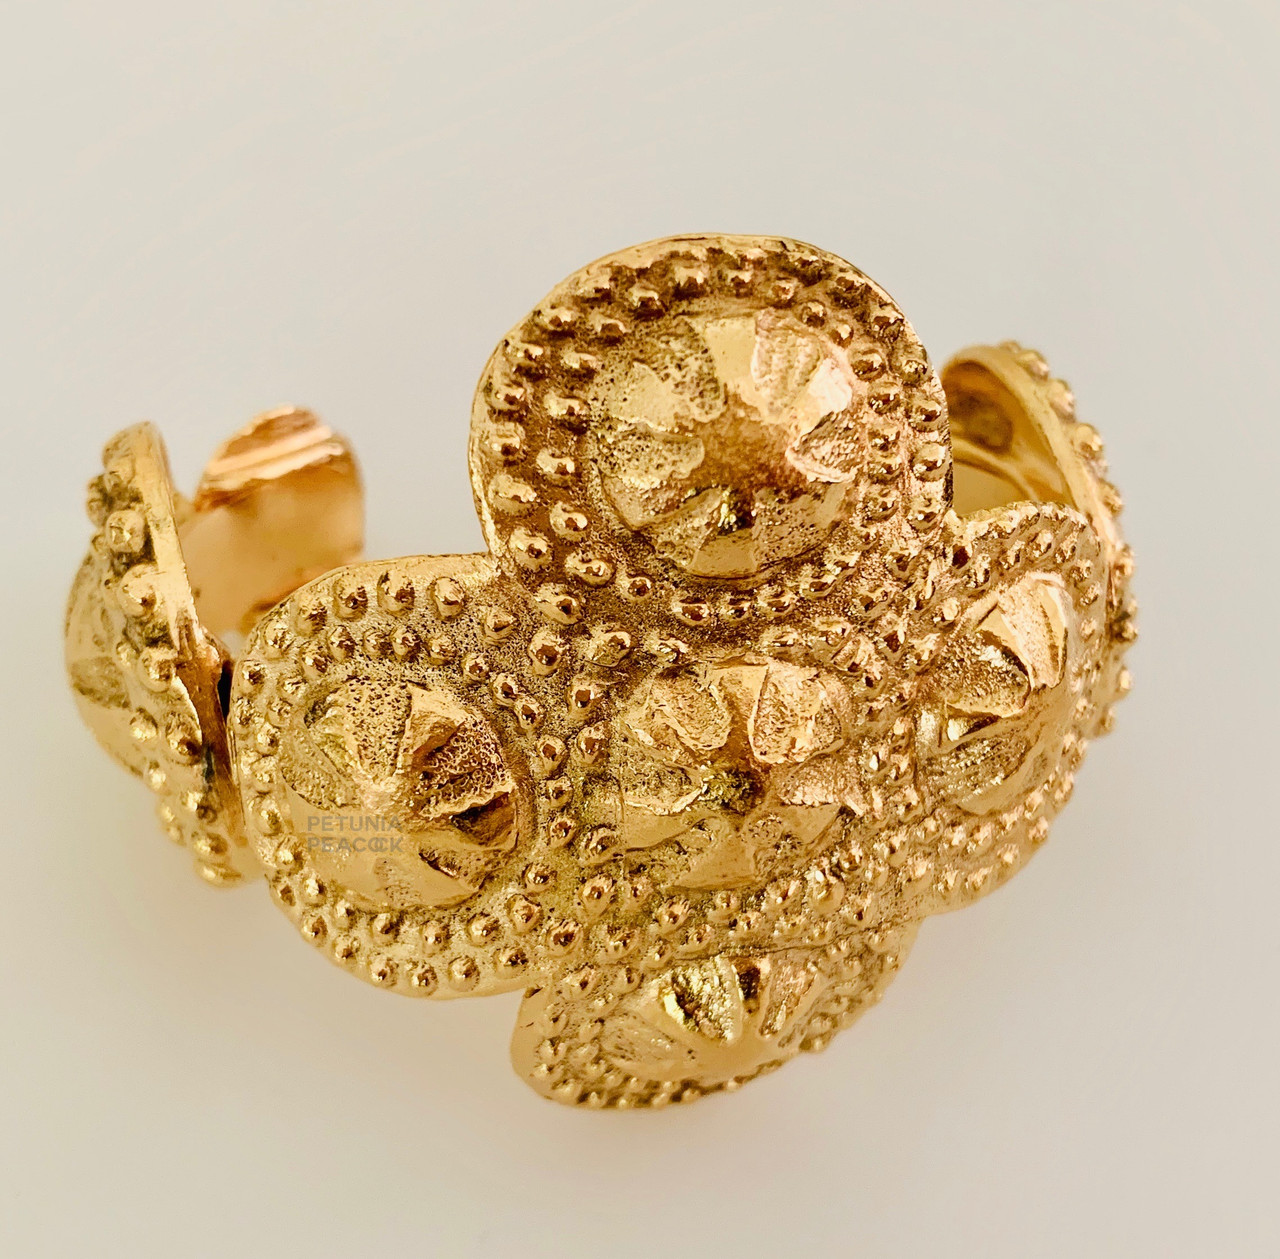 CHANEL VINTAGE STUDDED CUFF BRACELET  Petunia Peacock Vintage Chanel  Jewelry